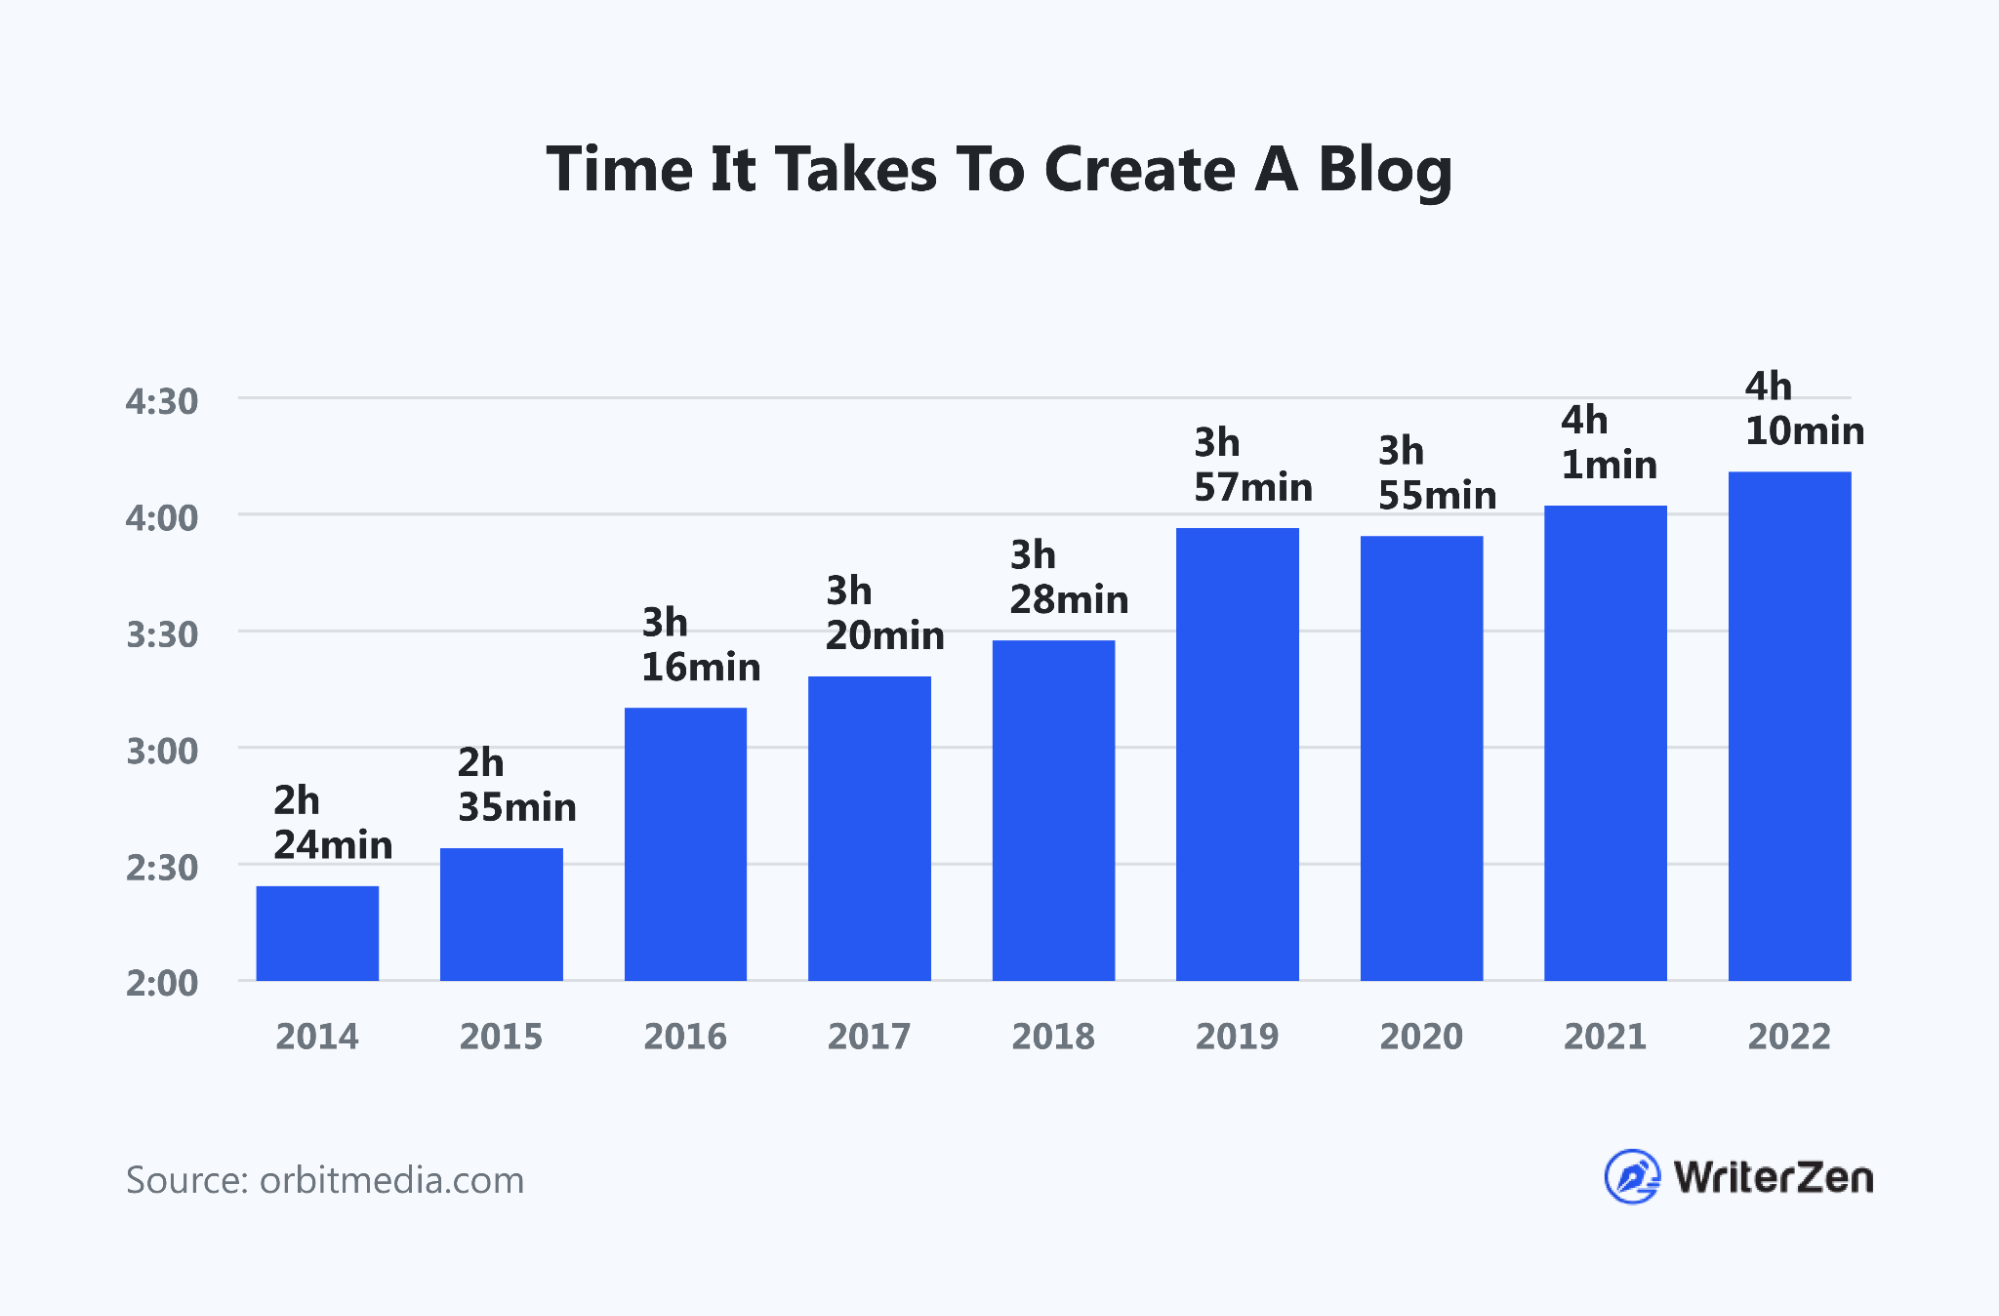 Time It Takes To Create A Blog